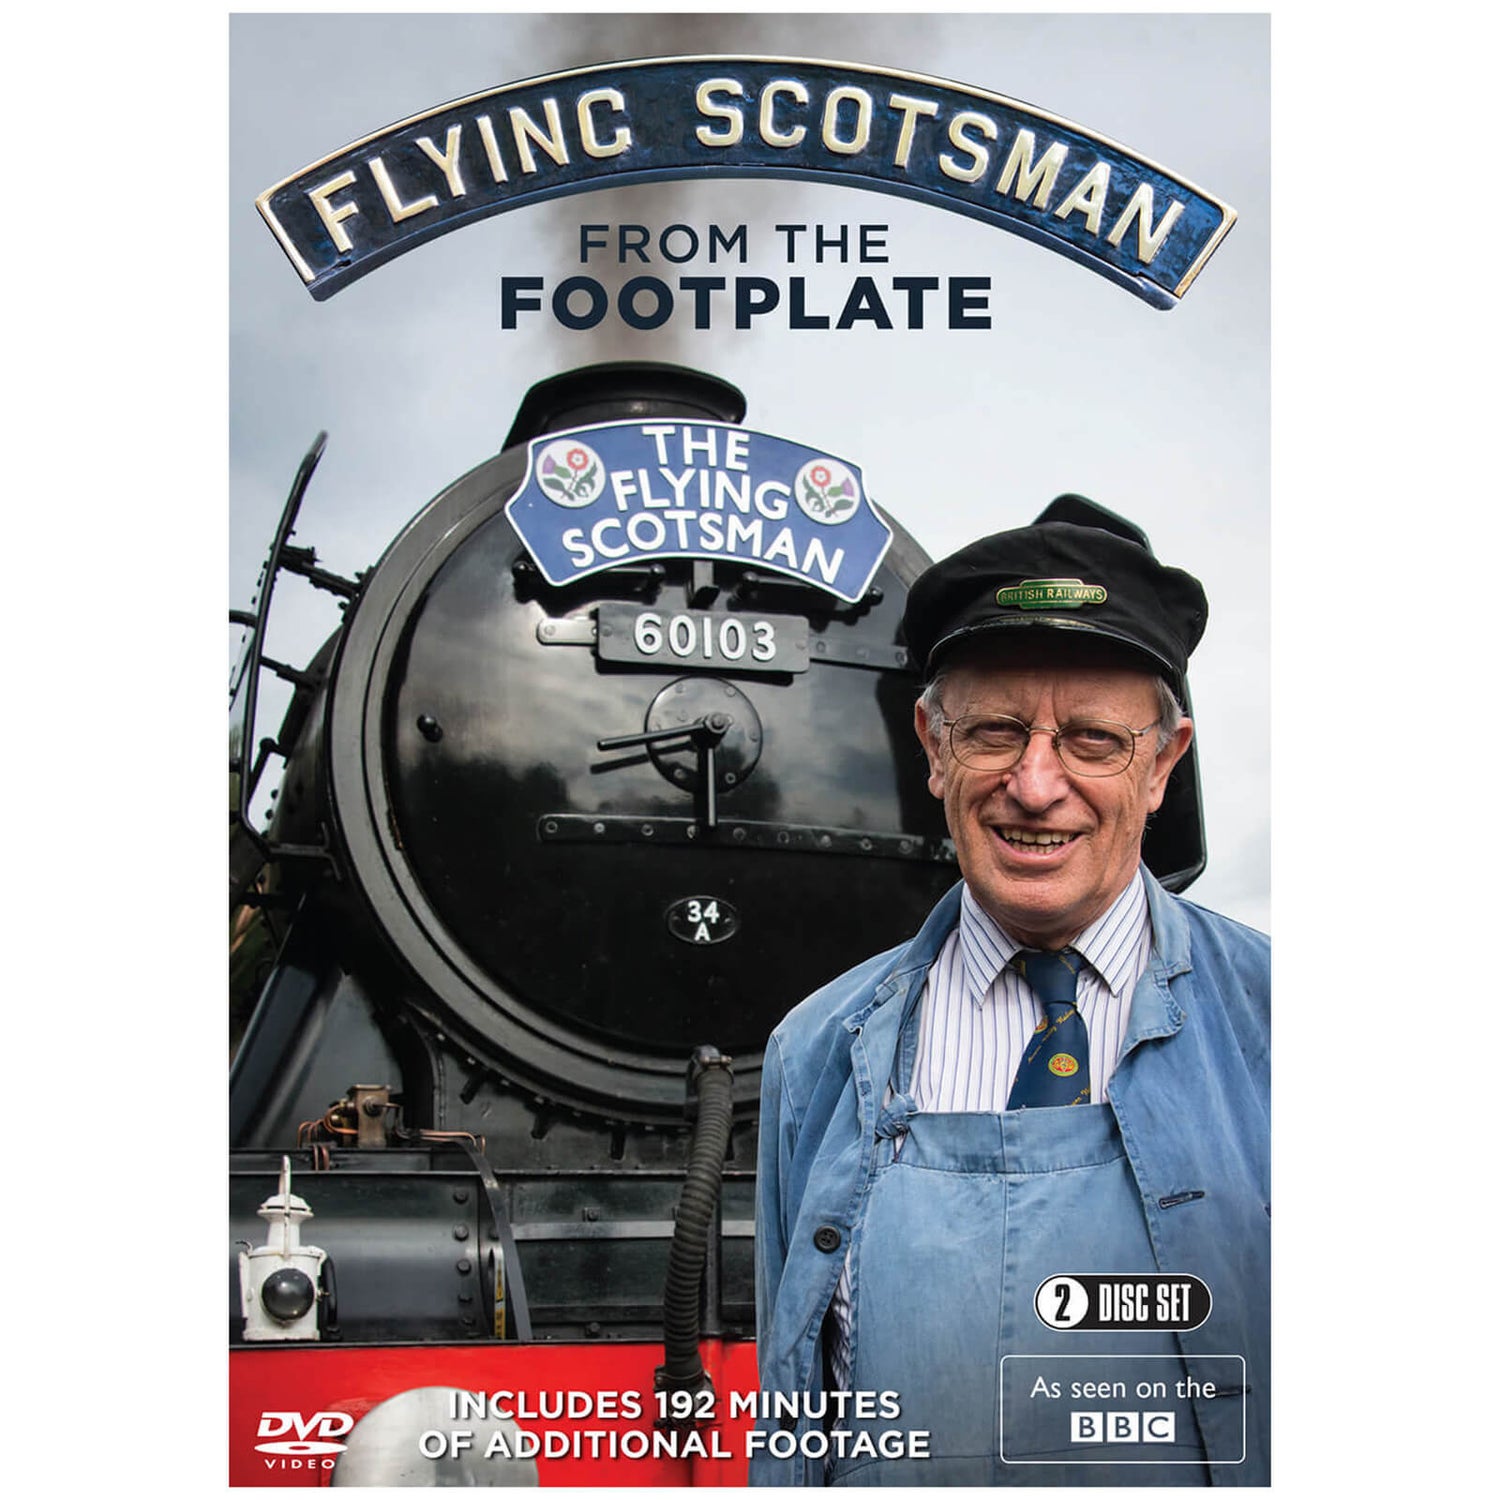 Flying Scotsman from the Footplate